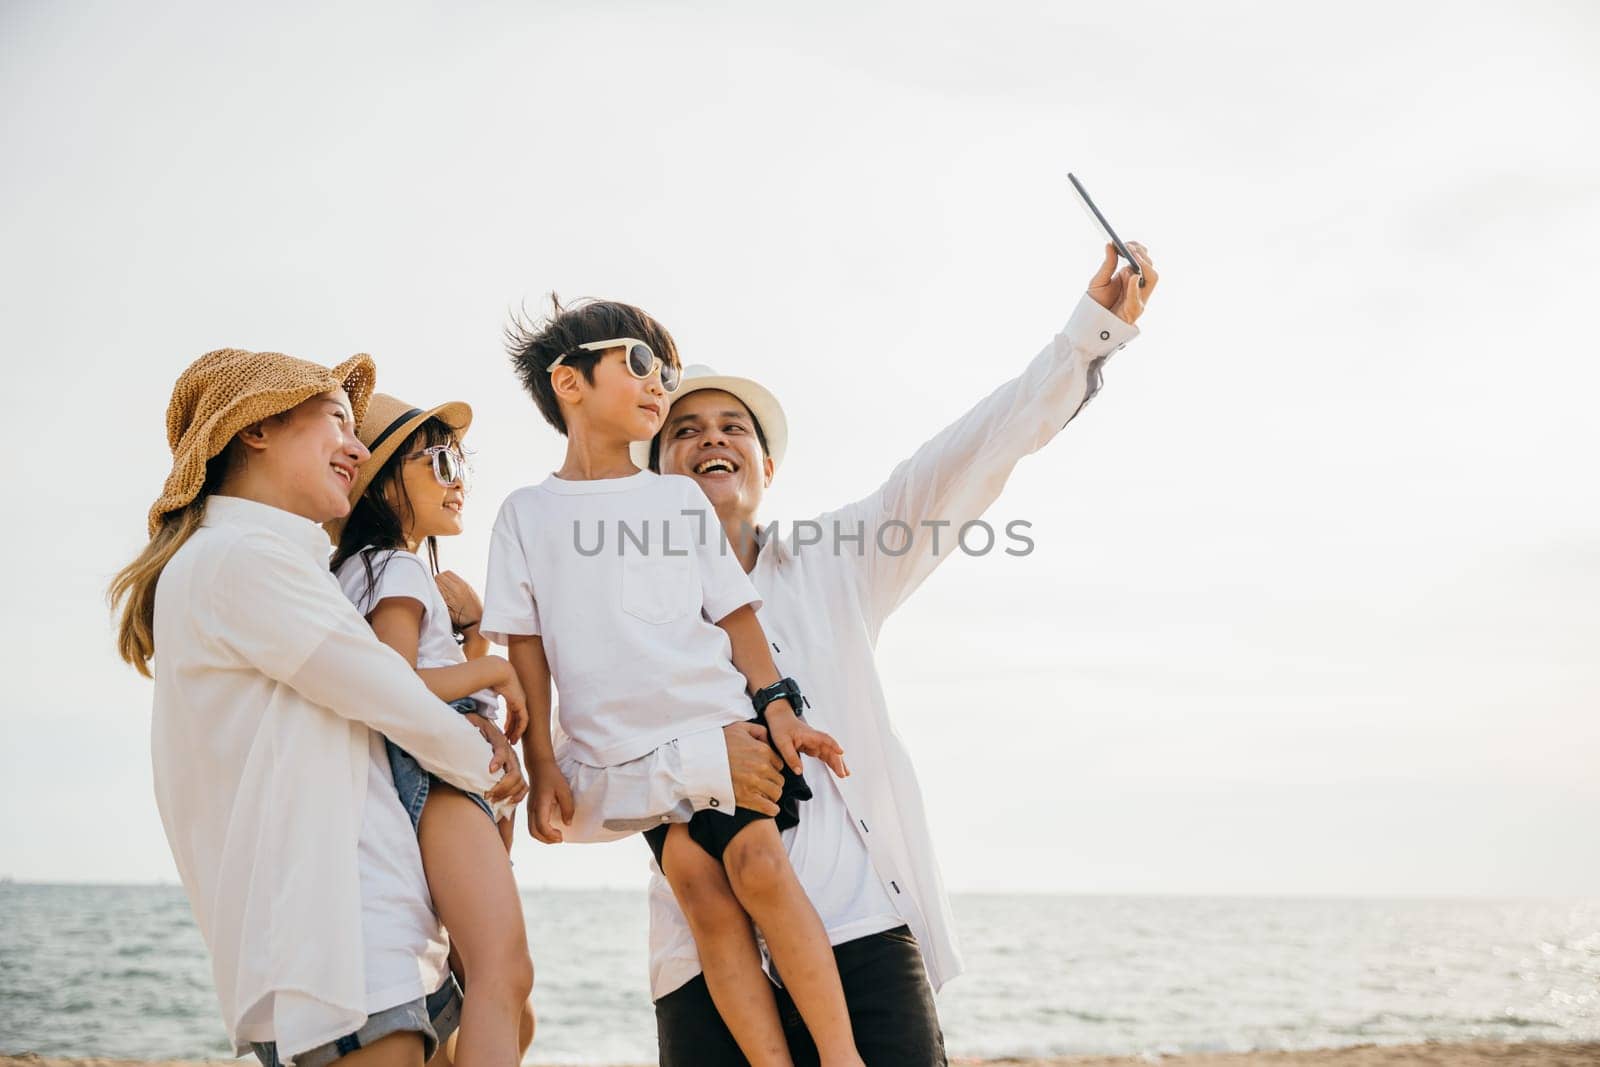 Capturing smiles and laughter a joyful family takes a selfie on the beach near the sea. A perfect snapshot of togetherness and happiness during their summer travel experience. Family on beach vacation by Sorapop